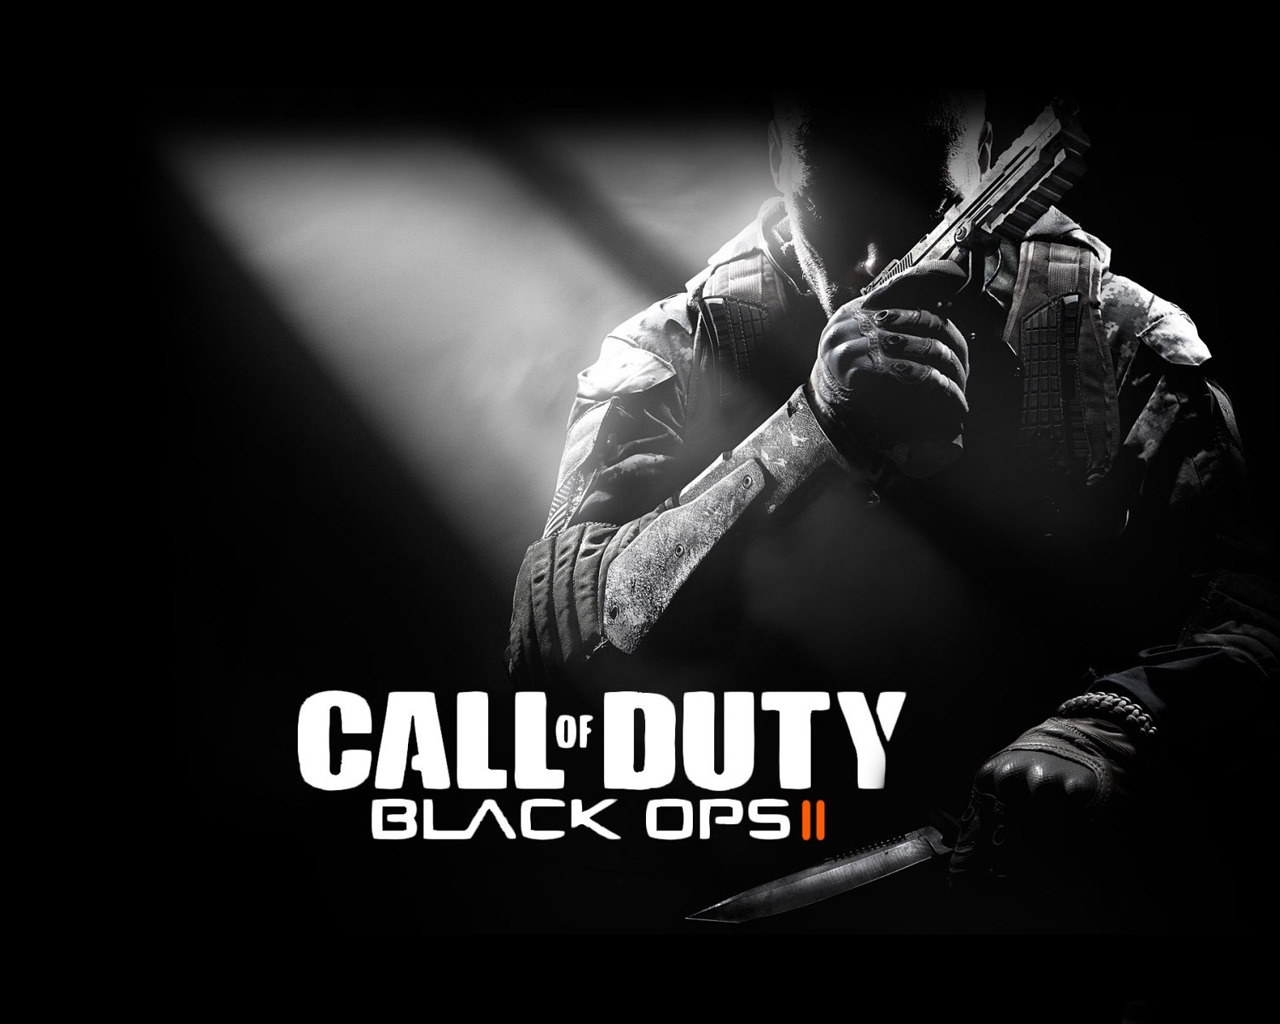 Call of Duty Black Ops II for 1280 x 1024 resolution